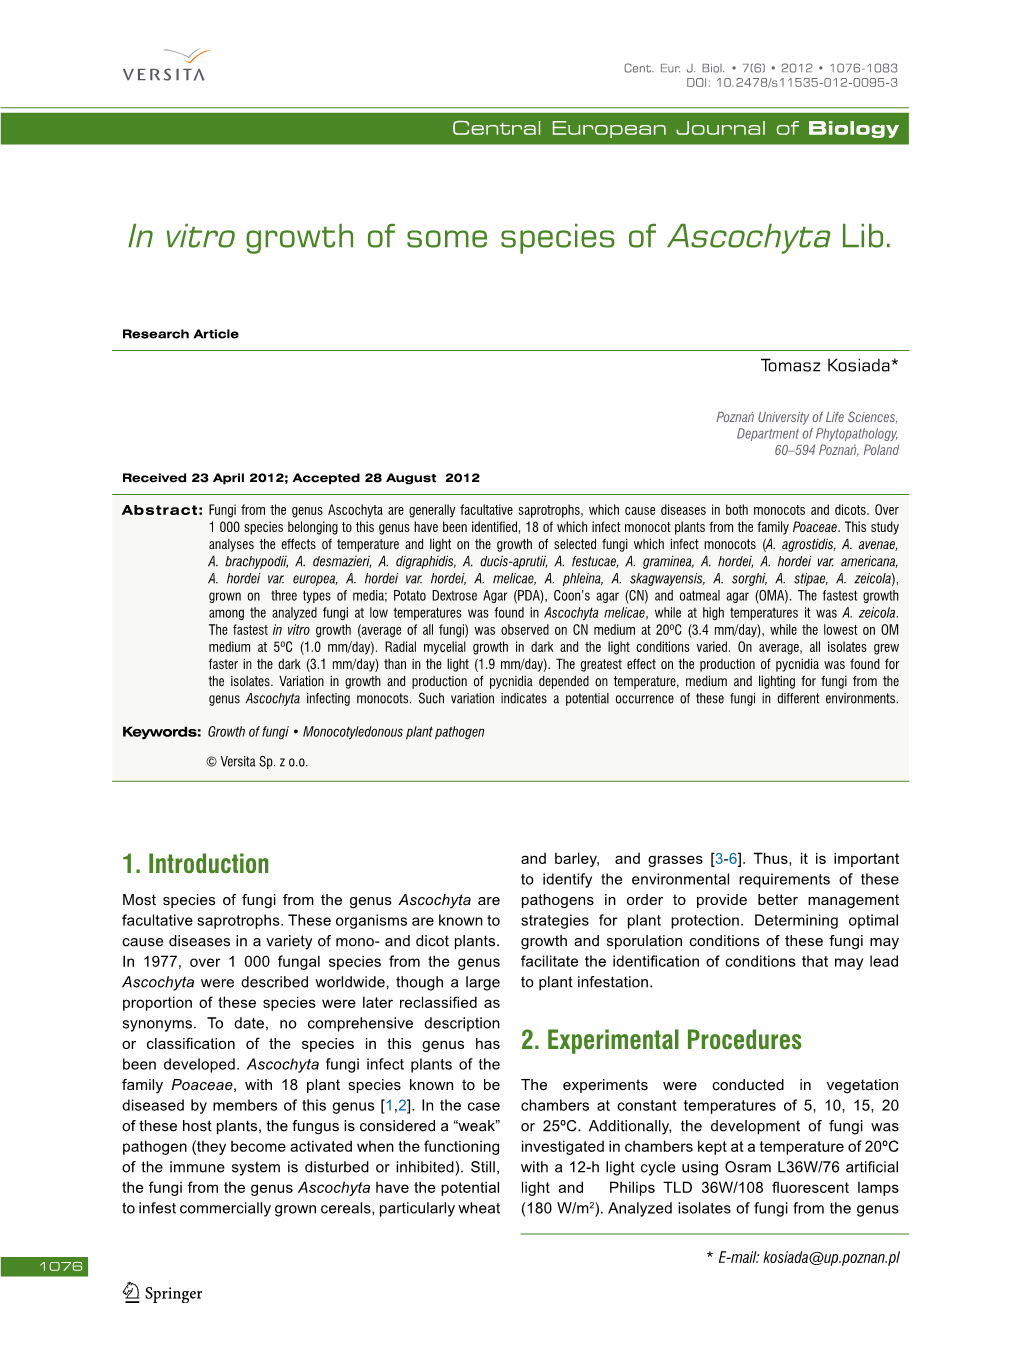 In Vitro Growth of Some Species of Ascochyta Lib